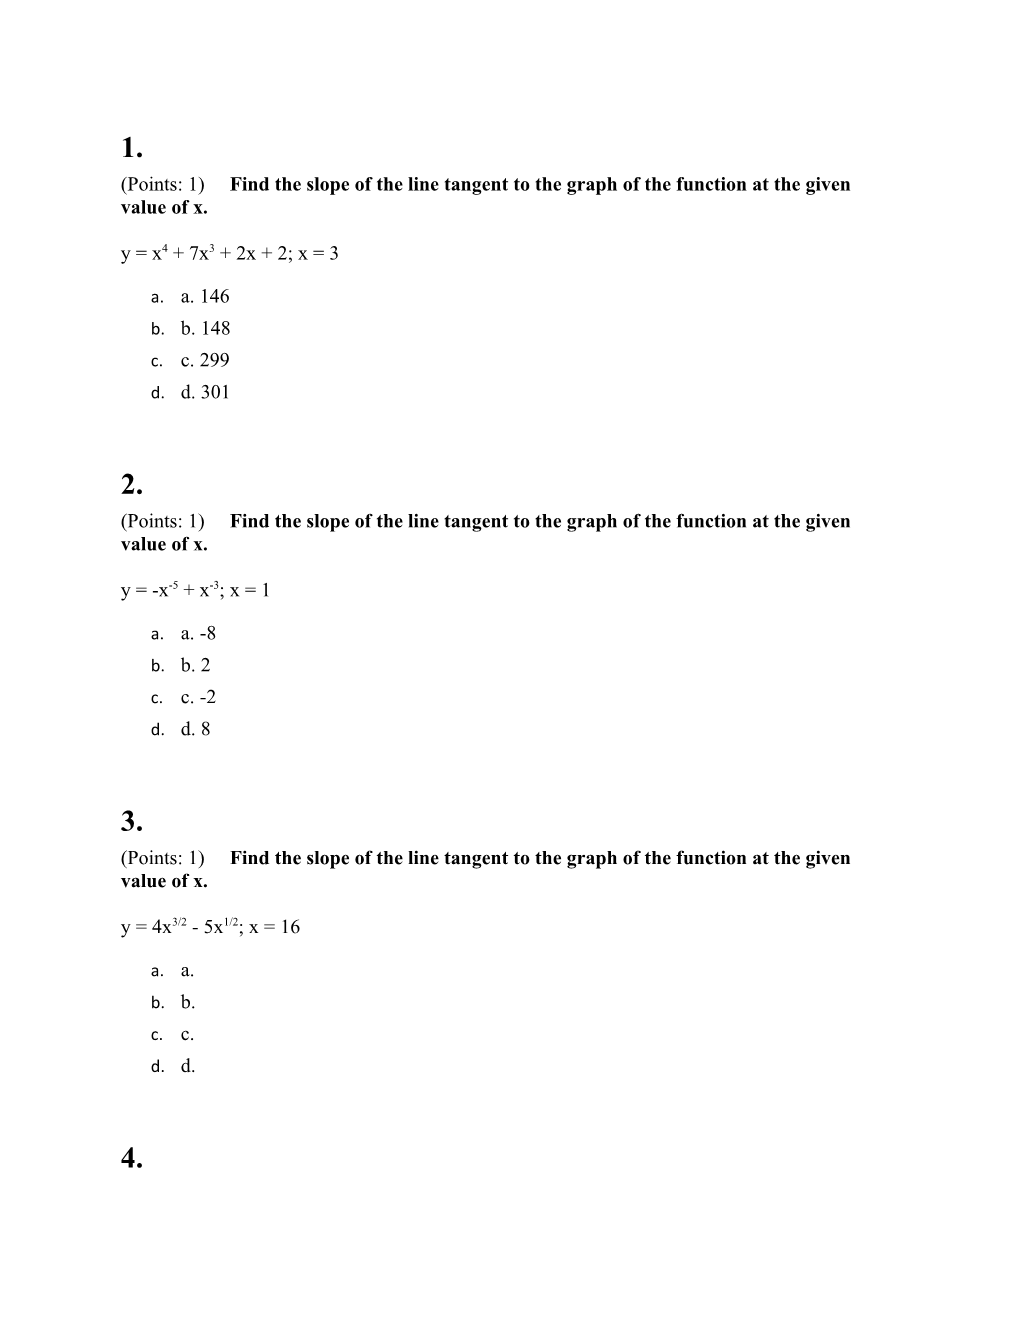 (Points: 1) Find the Slope of the Line Tangent to the Graph of the Function at the Given